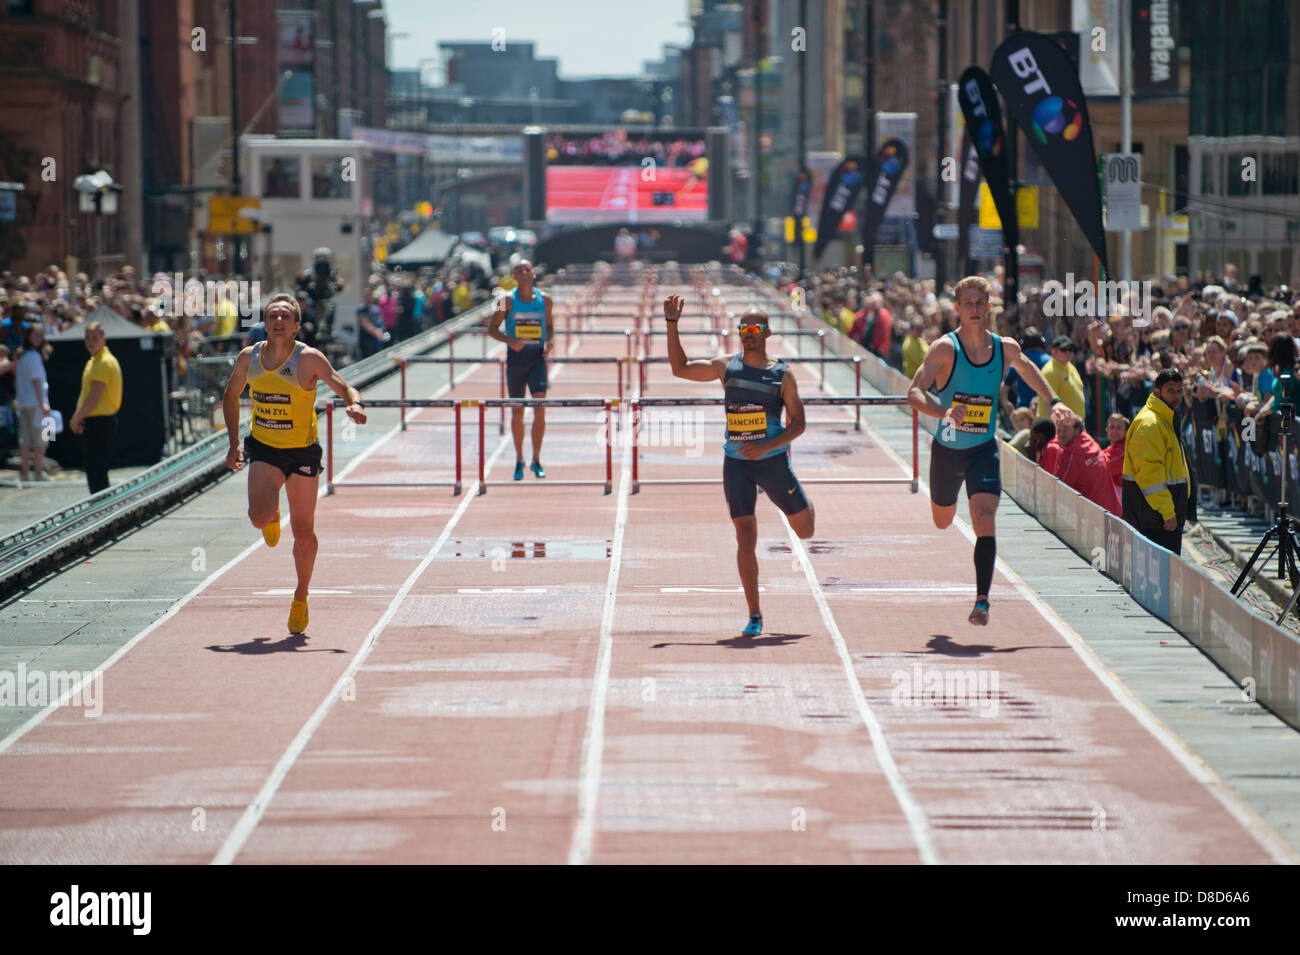 MANCHESTER, UK. 25th May 2013. Louis Jacob van Zyl (furthest left) of South Africa sprints to take 1st place during the Mens 200m Hurdles event in a time of 22.63 which took place on Deansgate in Manchester during the 2013 BT Great CityGames. He beat Jack Green (Great Britain, 2nd, furthest right), Felix Sanchez (Dominican Republic, 3rd, second right) and Andy Turner (Great Britain, DNF, second left). Credit: News Shots North/Alamy Live News (Editorial use only). Stock Photo